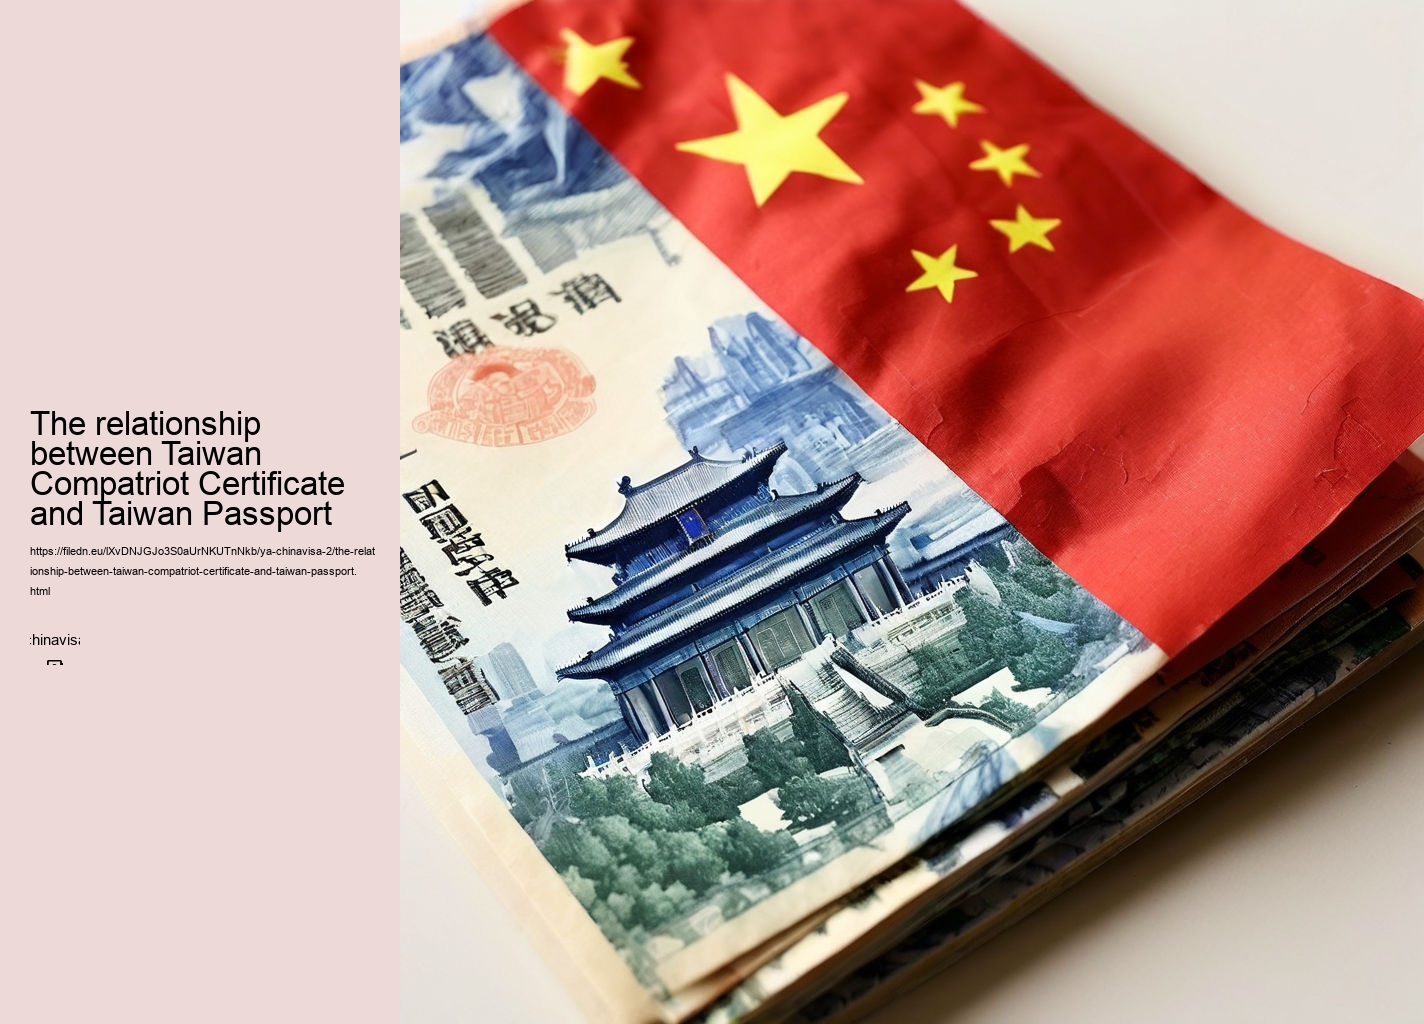 The relationship between Taiwan Compatriot Certificate and Taiwan Passport